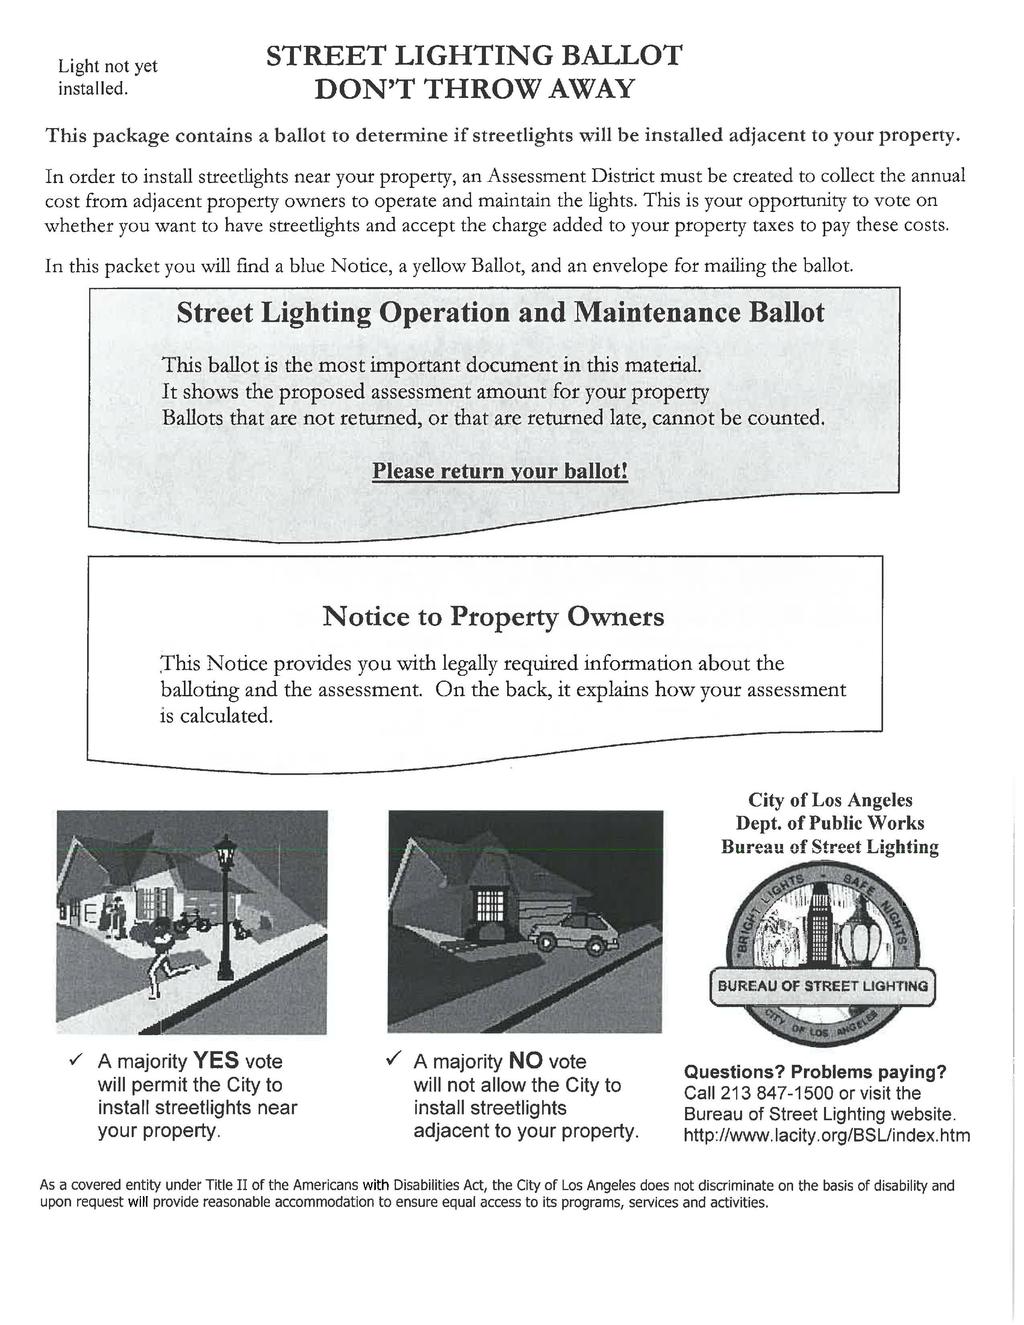 STREET LIGHTING BALLOT DON T THROW AWAY Light not yet installed. This package contains a ballot to determine if streetlights will be installed adjacent to your property.